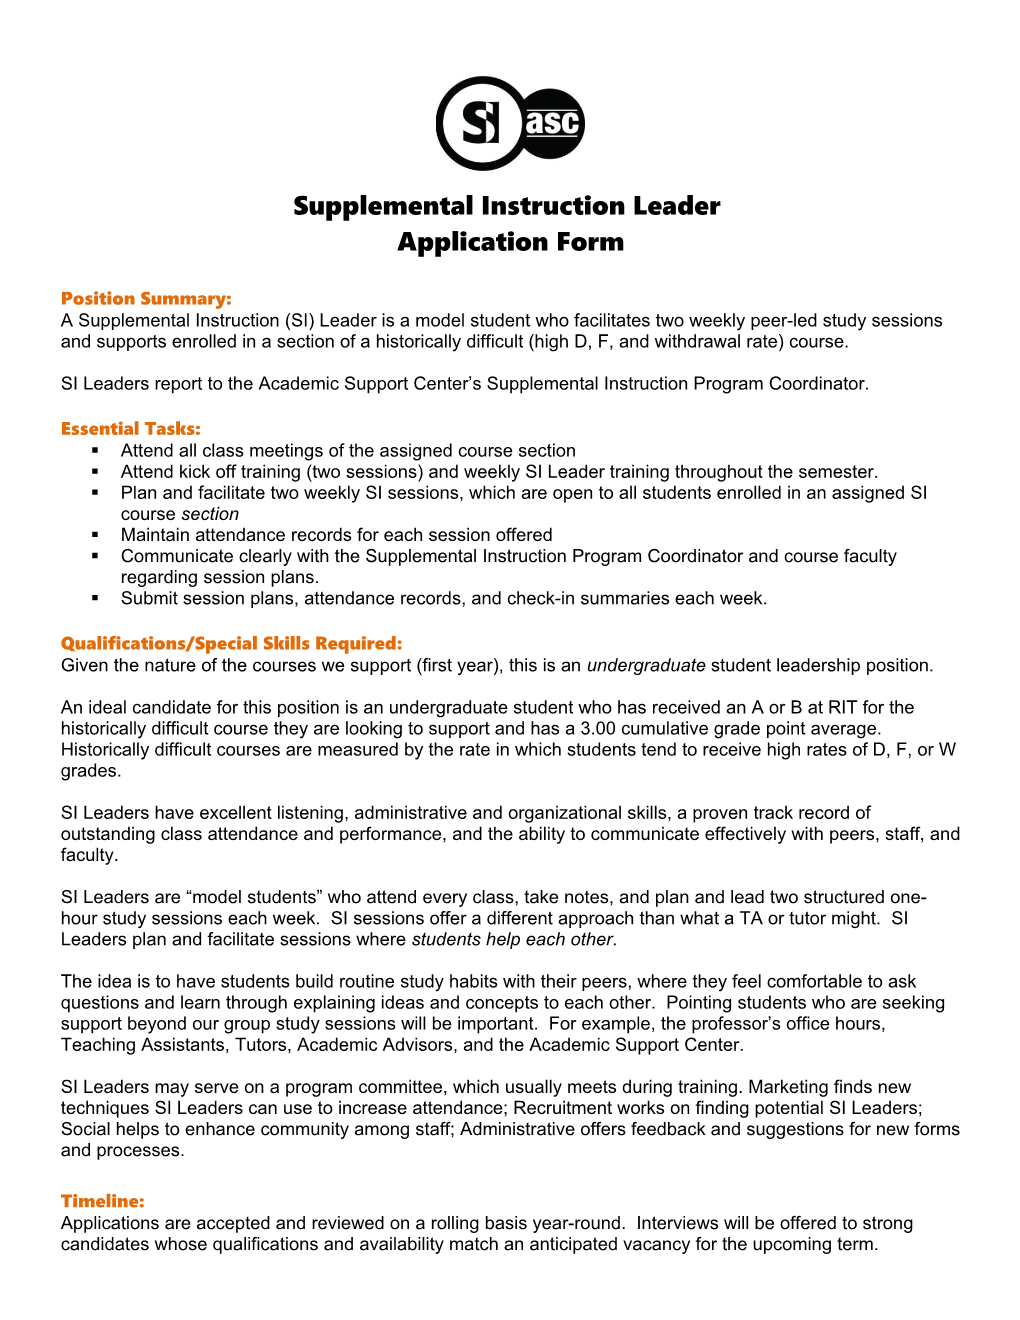 SI Leader Employment Application